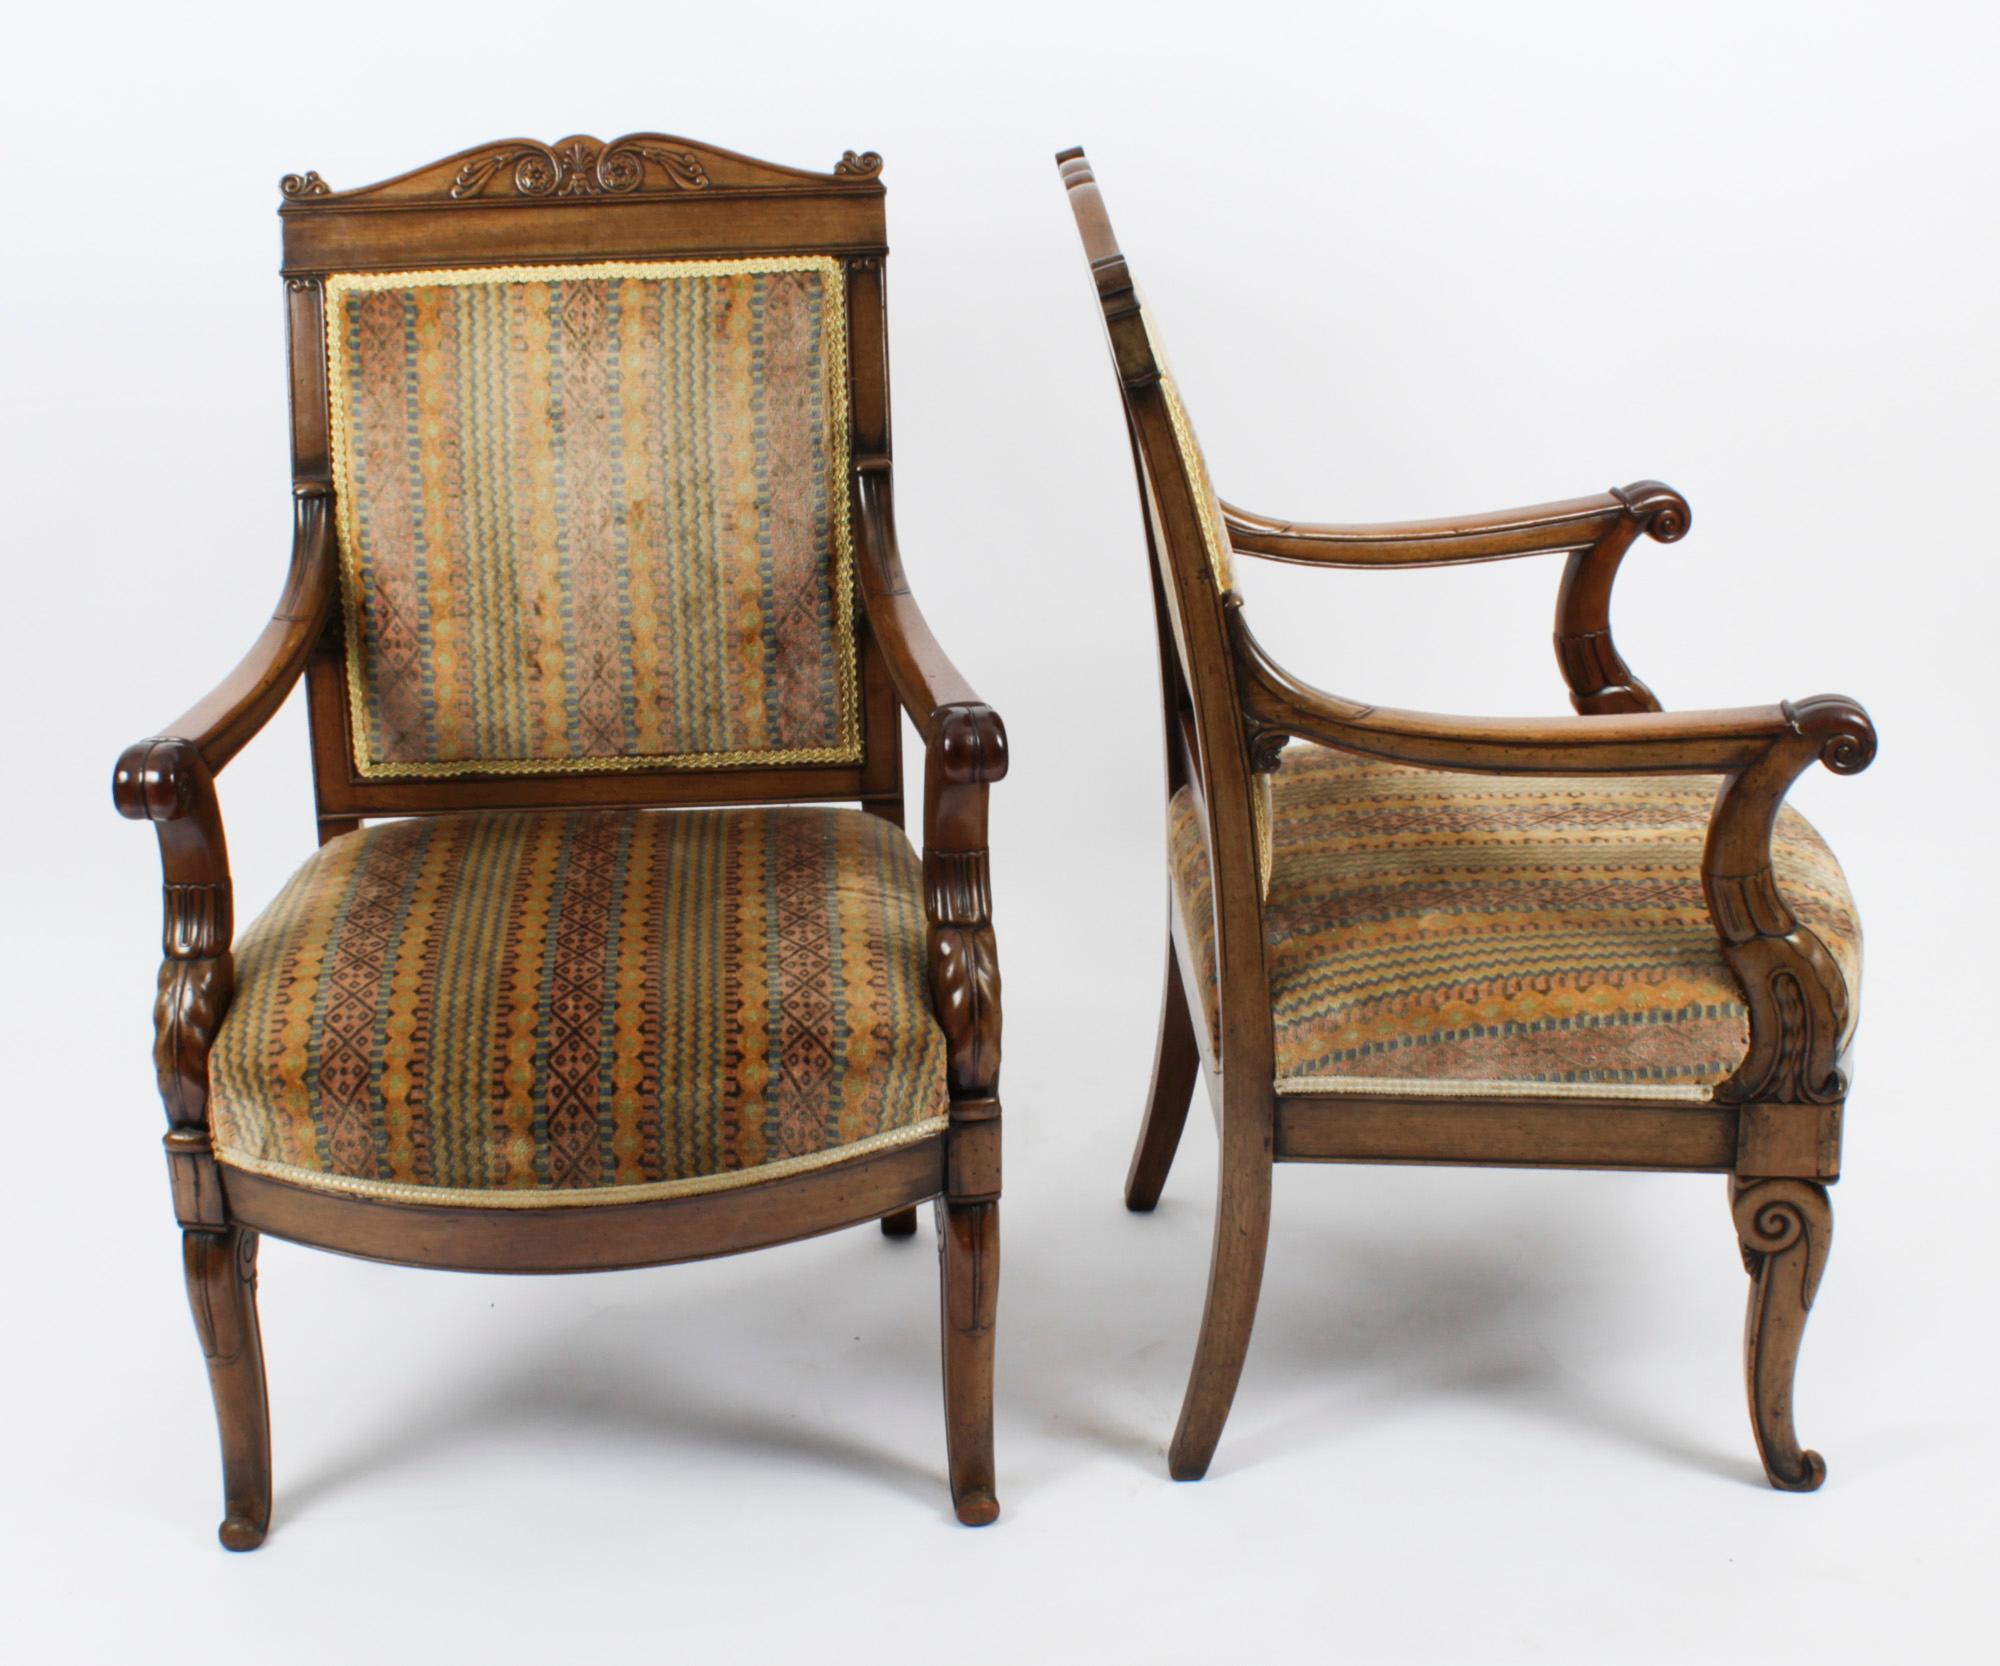 This is an elegant antique pair of French Empire Revival upholstered back mahogany armchair fauteuils, circa 1880 in date.

The mahogany is beautiful in colour with superb patina. The carved top-rails feature scrolling paterae and anthemion above